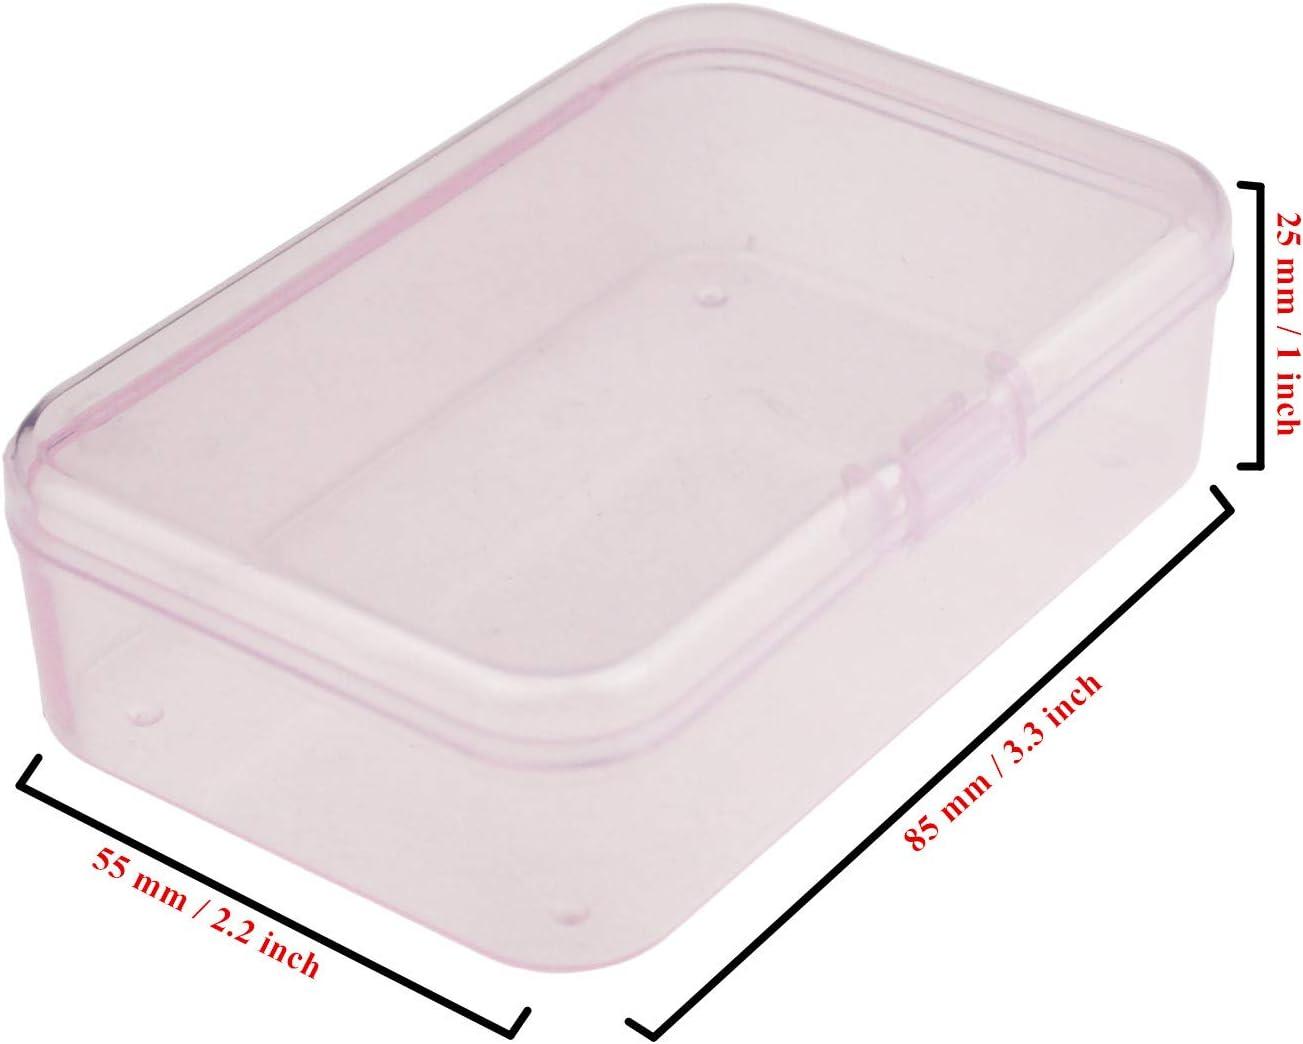 Jyongmer 36 Pieces Mini Clear Plastic Storage Containers Box with Hinged  Lids, 2.12 x 2.12 x 0.79 Inches Empty Hinged Boxes for Beads, Small Items